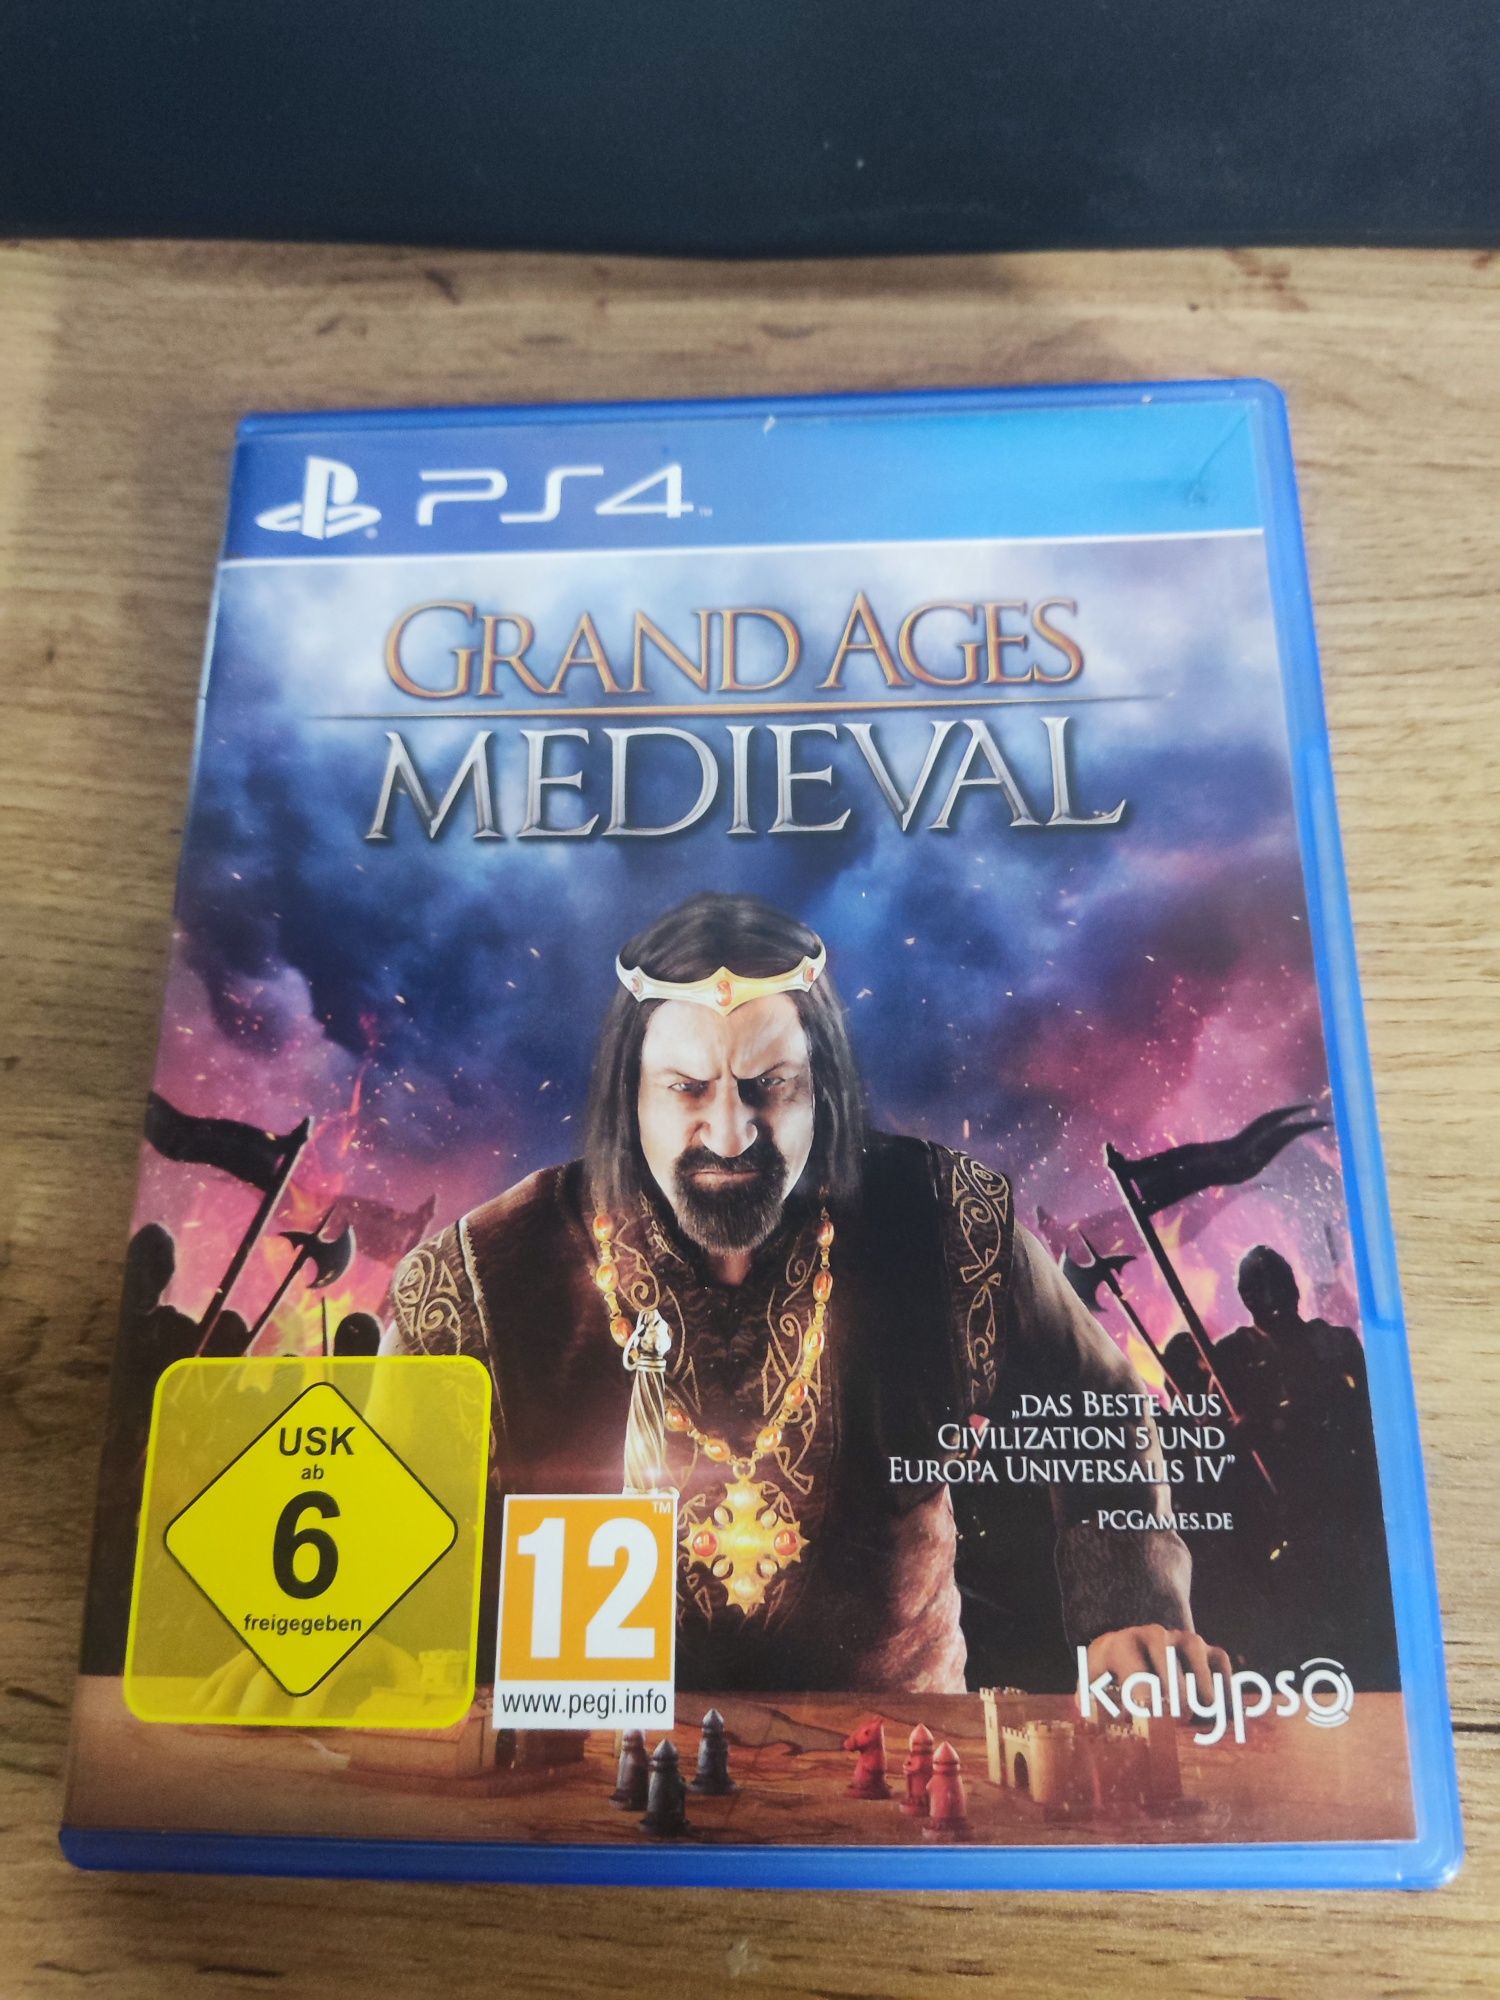 Grand Ages Medieval Playstation 4 PS4